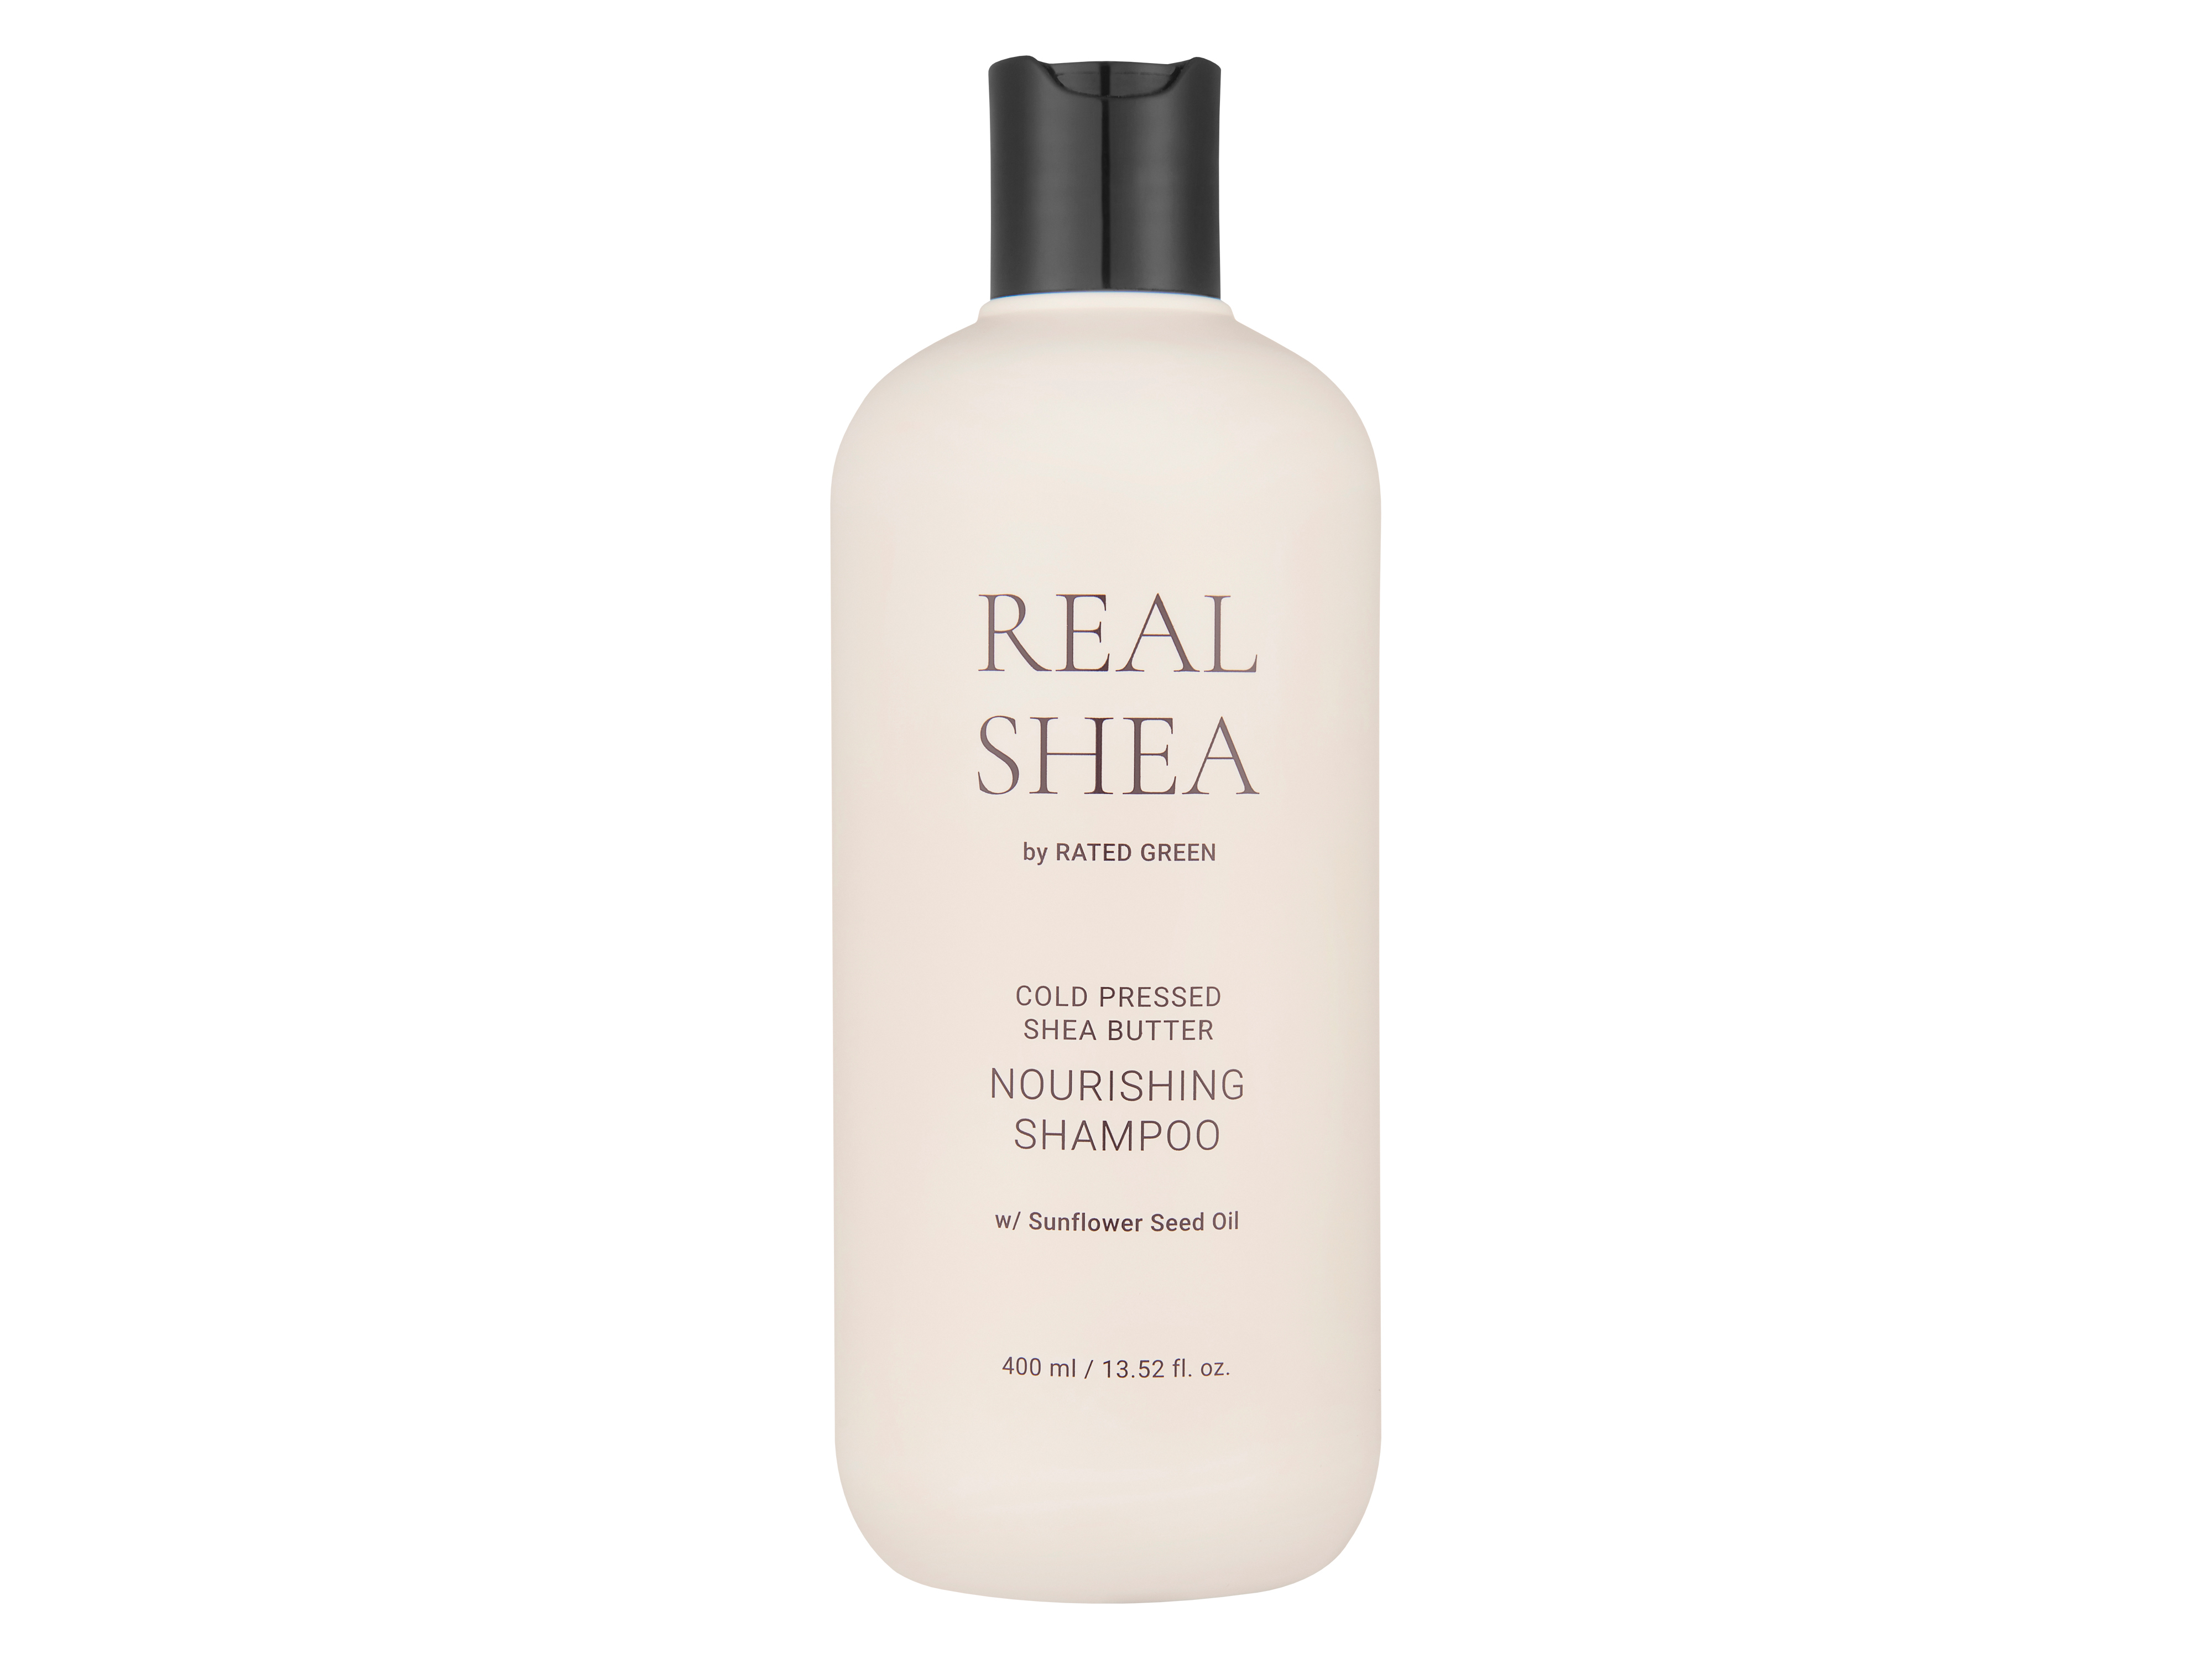 Rated Green Cold Pressed Shea Butter Nourishing Shampoo, 400 ml